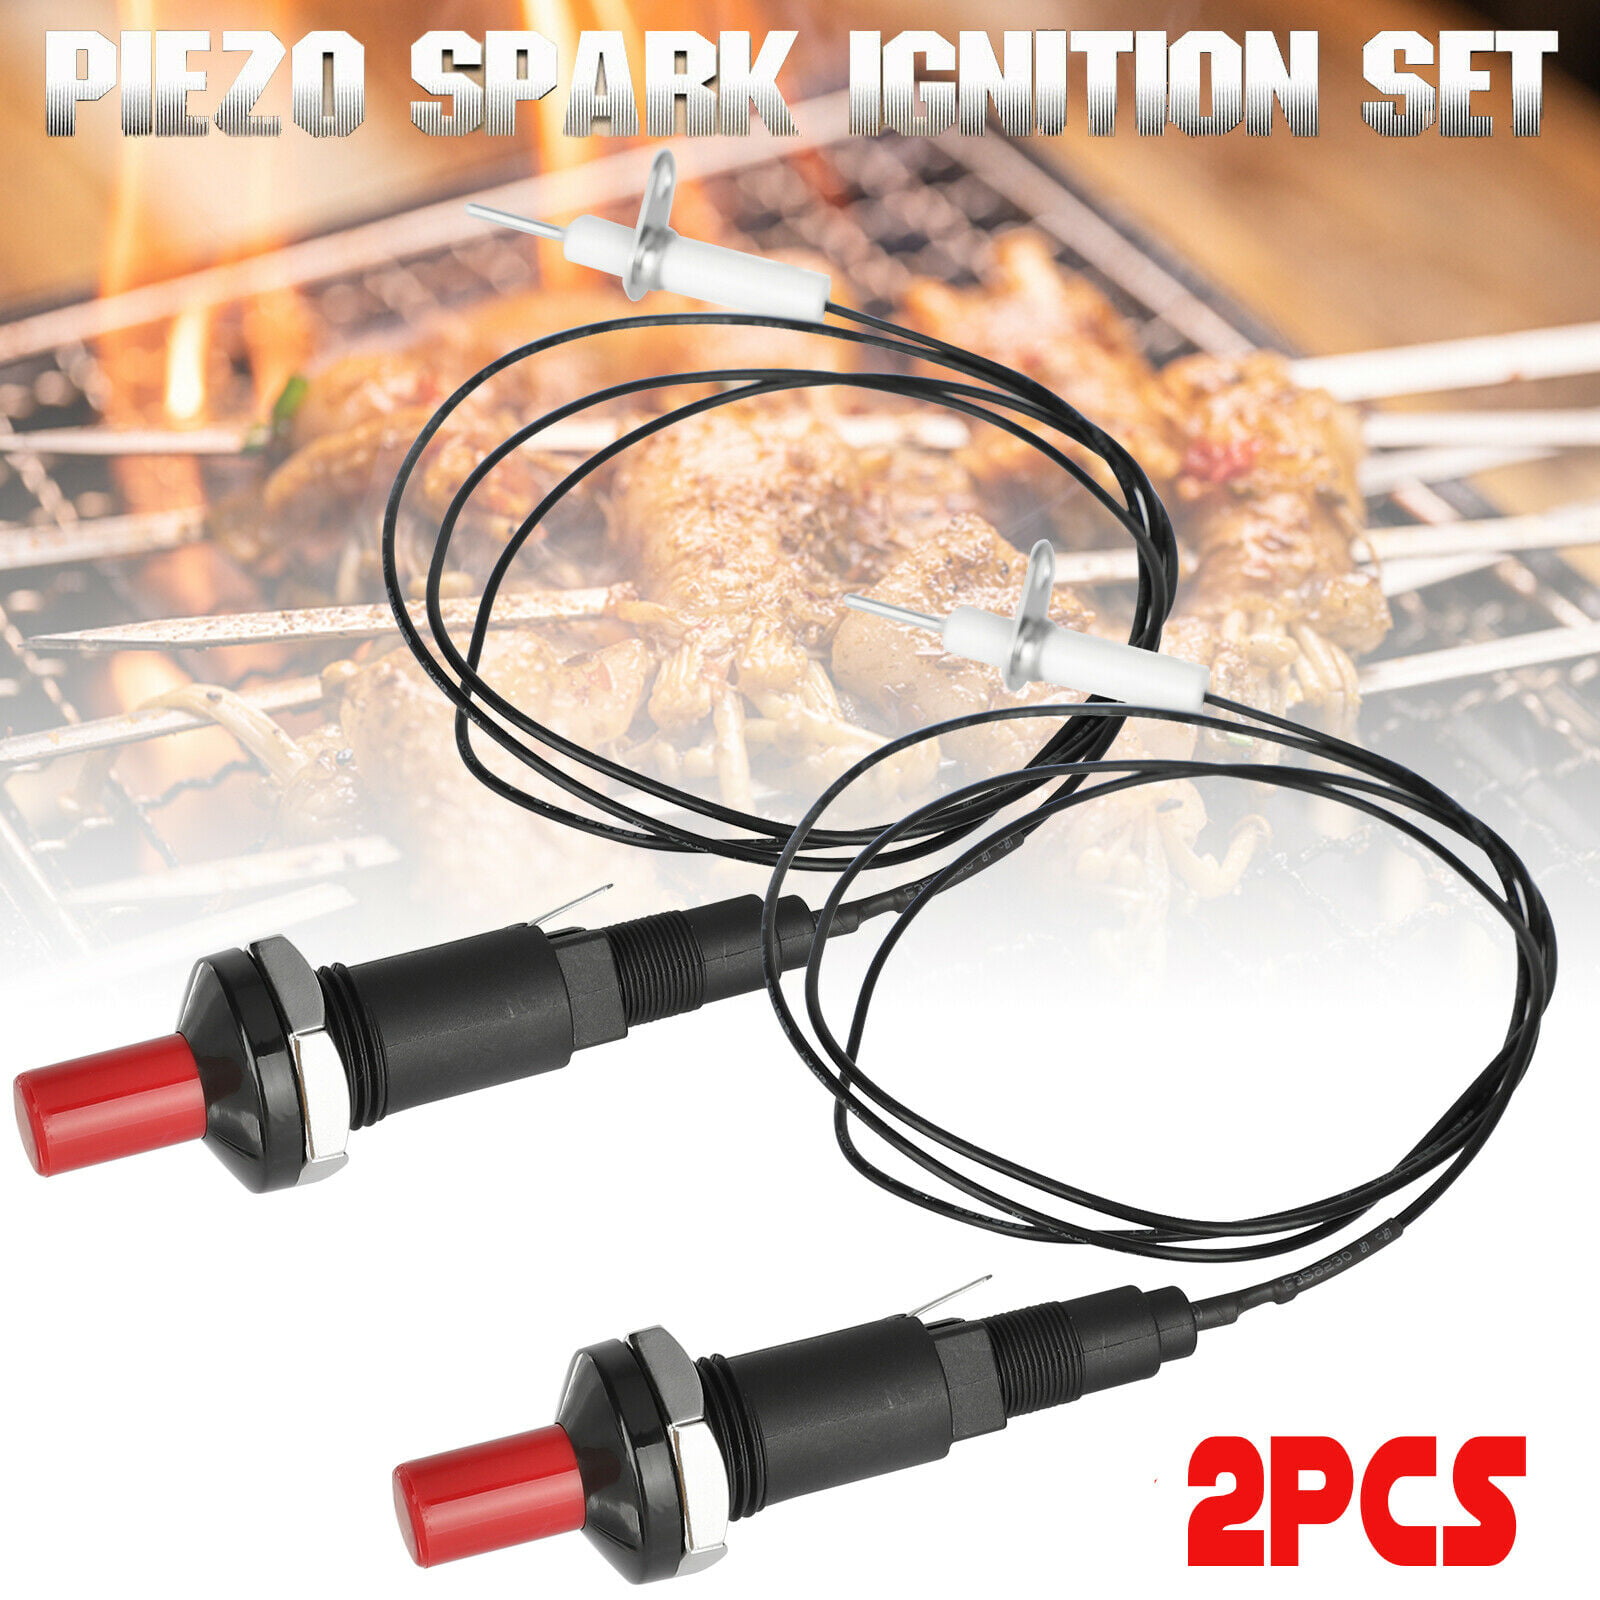 US Seller Universal Piezo Spark Ignition Push Button Igniter Gas Grill w/ Lead 